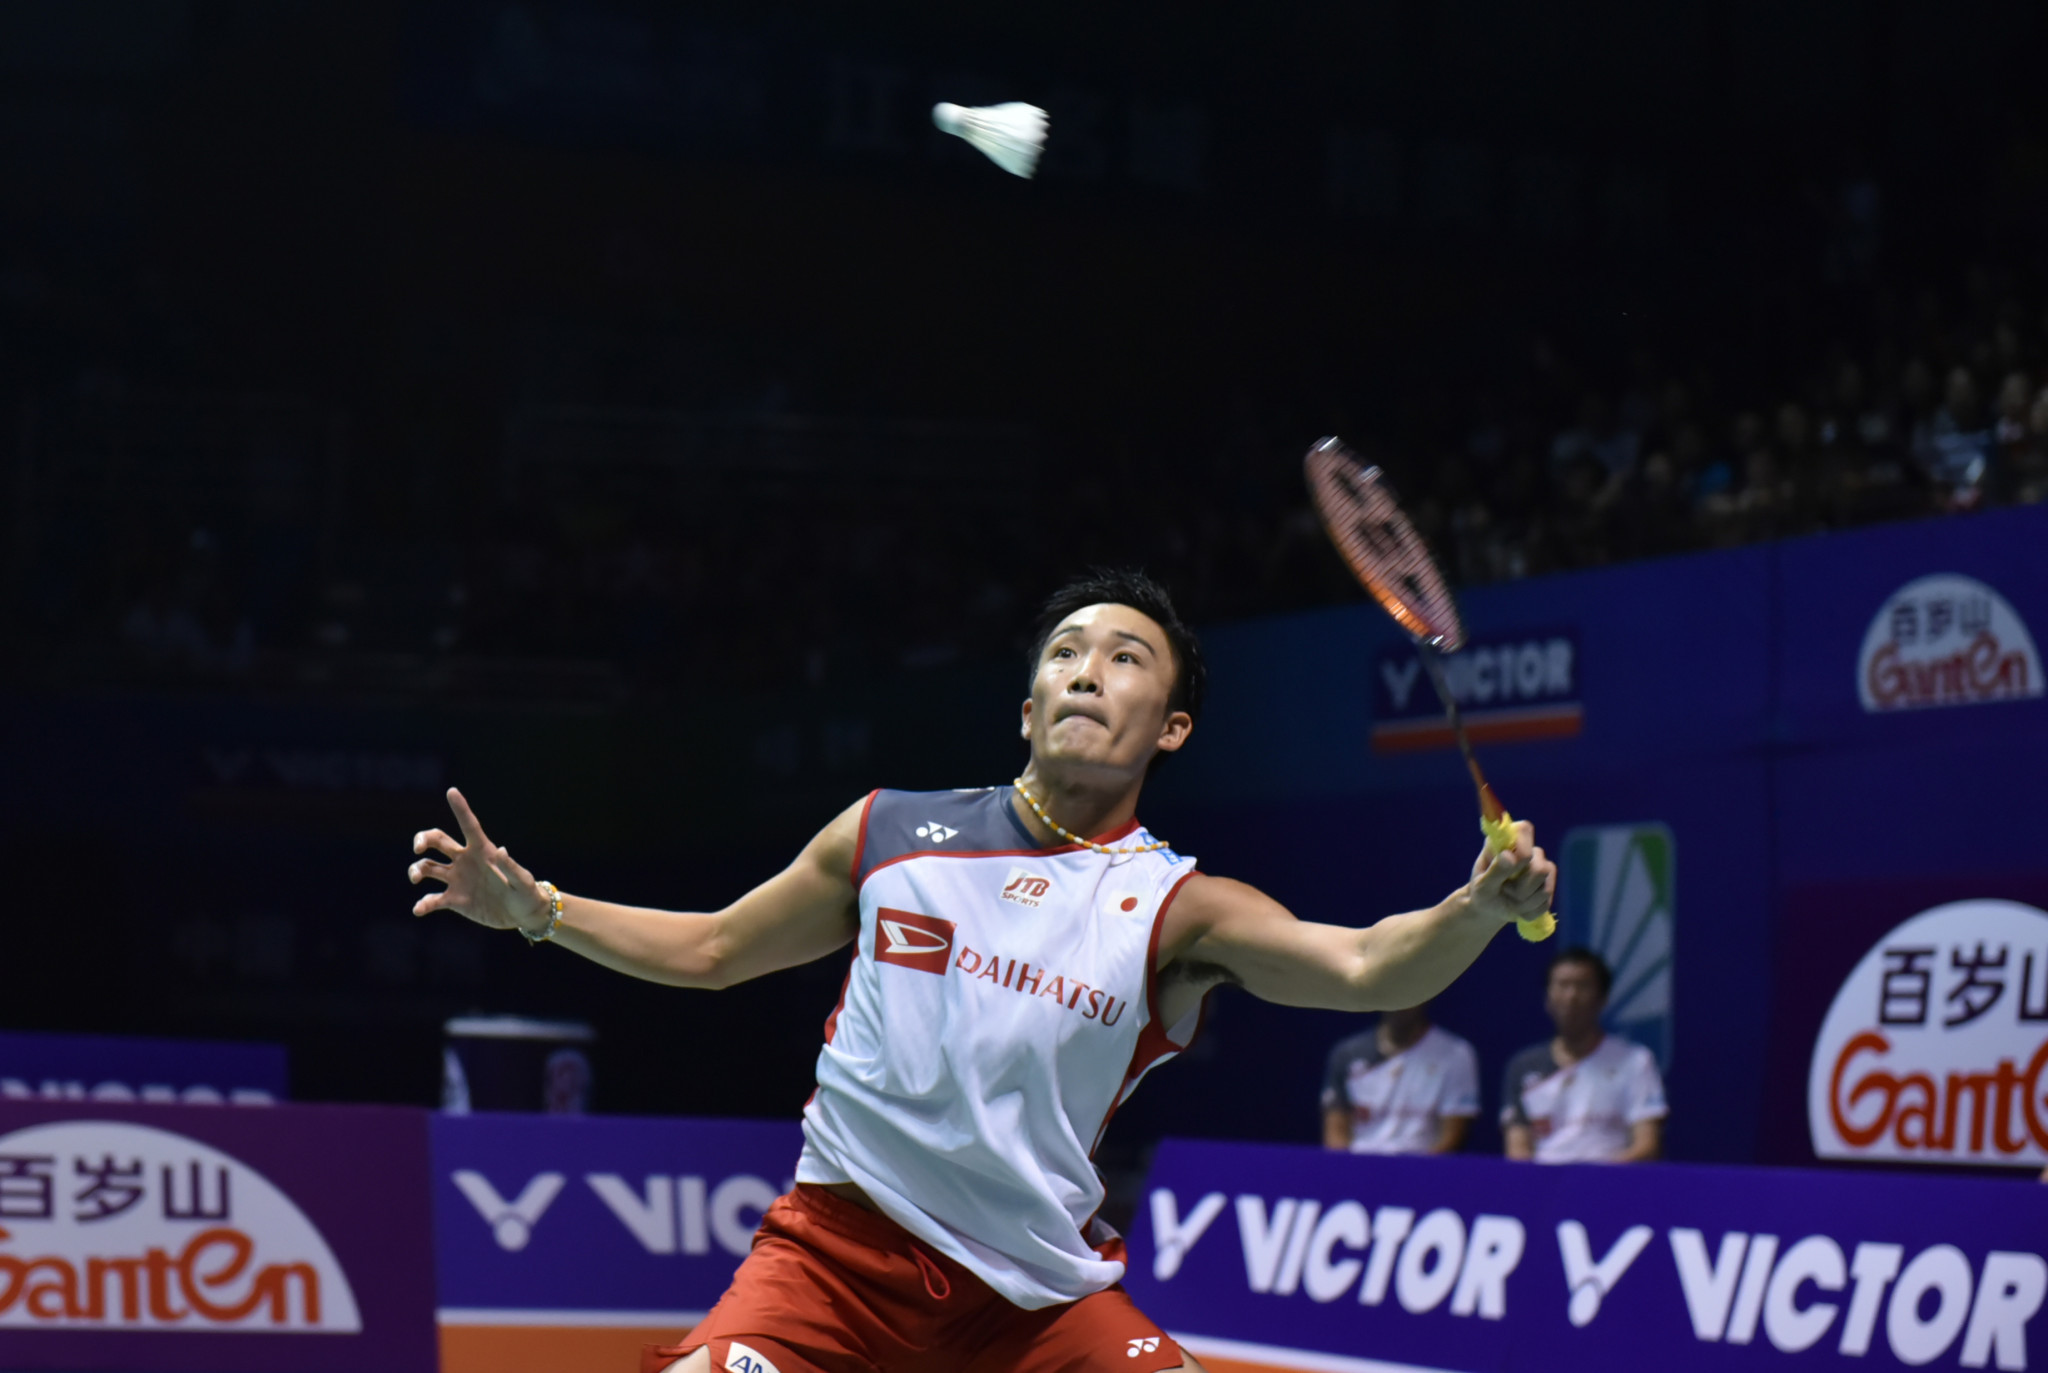 World champion Kento Momota eased through to the semi-finals of the BWF Denmark Open with a straight-games victory over Thailand's Khosit Phetpradab in Odense today ©Getty Images